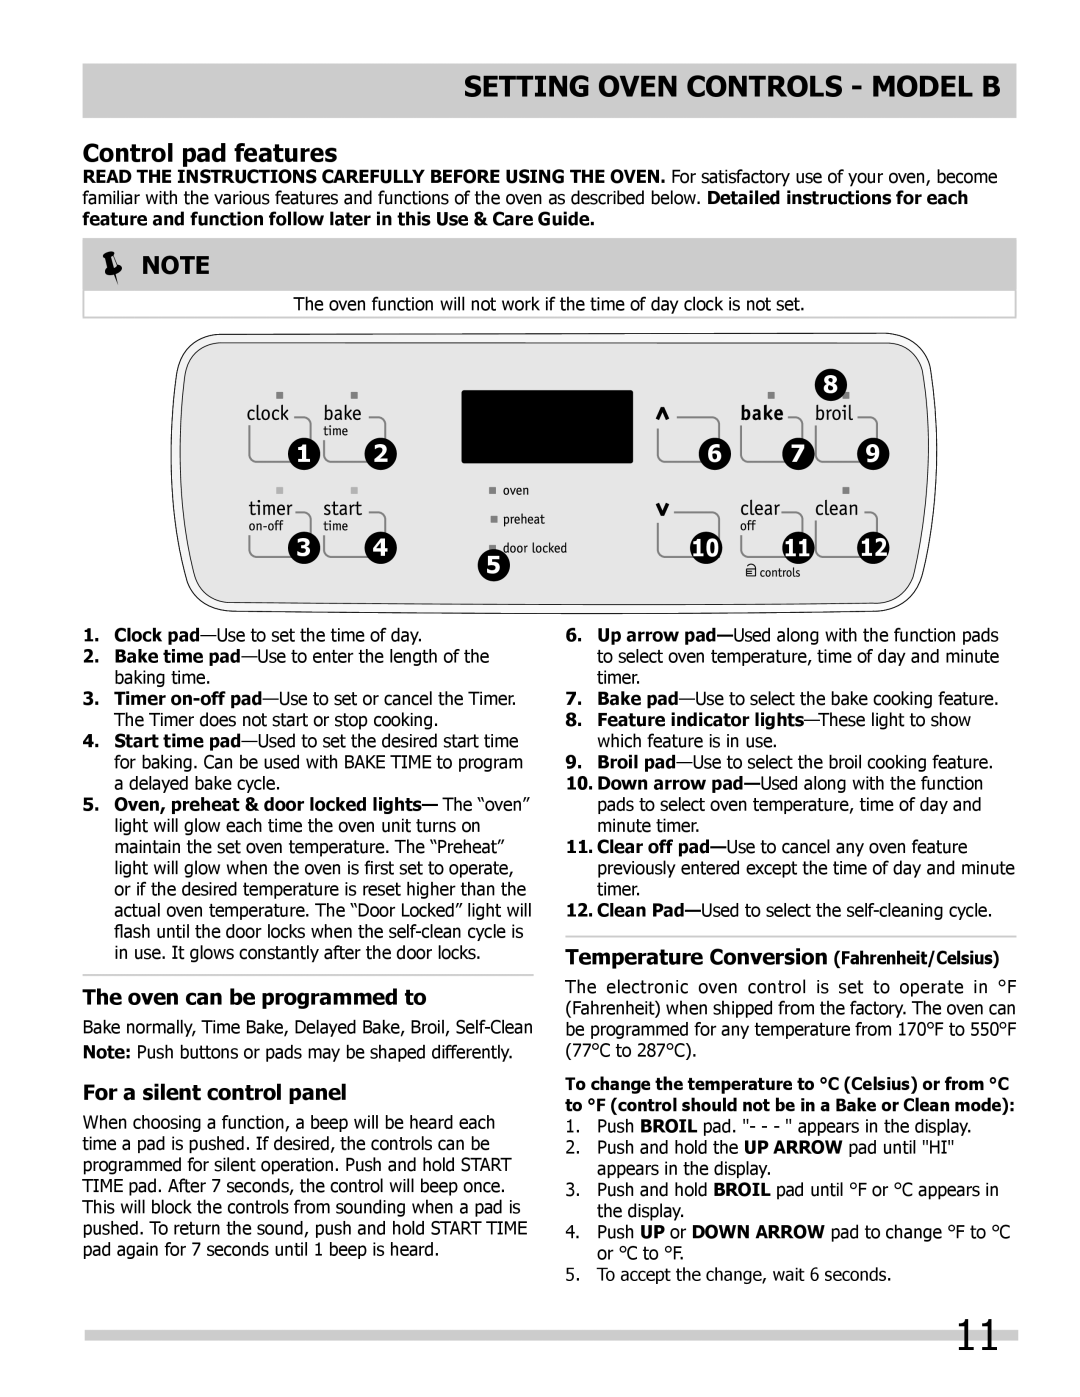 Frigidaire 318200964 Setting OVEN controls - Model B, The oven can be programmed to, For a silent control panel,  Note 